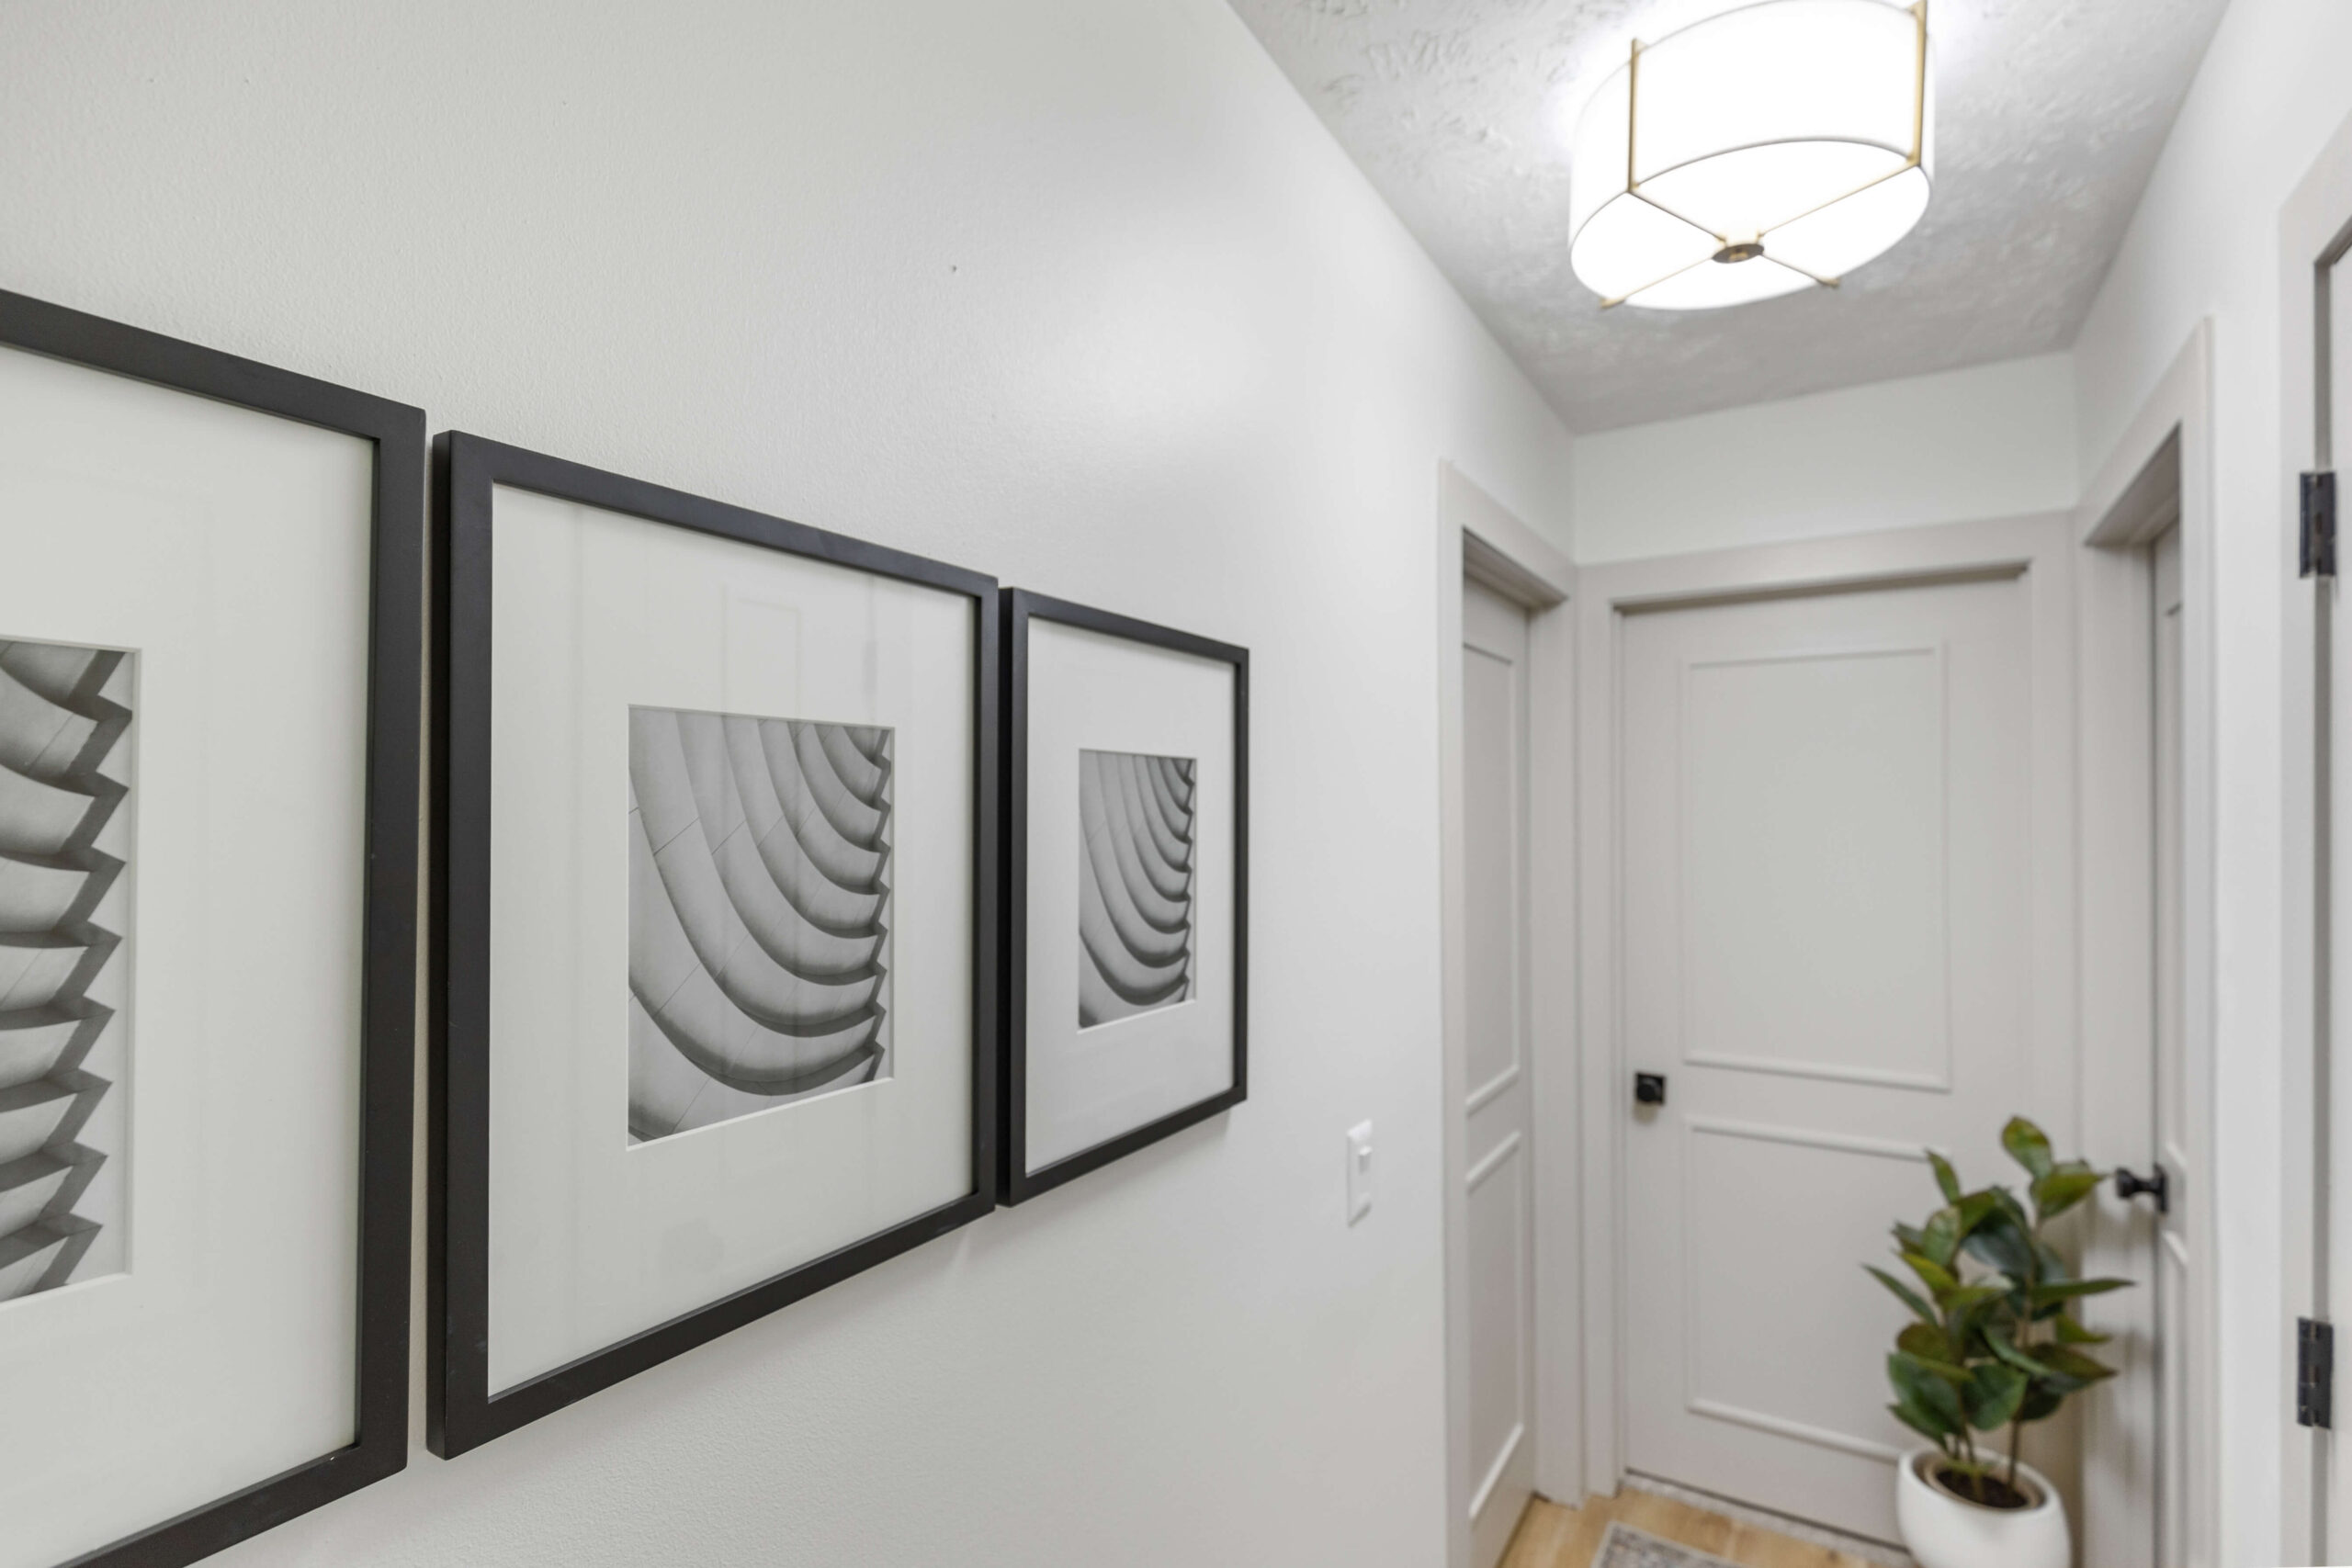 Hanging artwork in a gallery wall layout in a hallway.